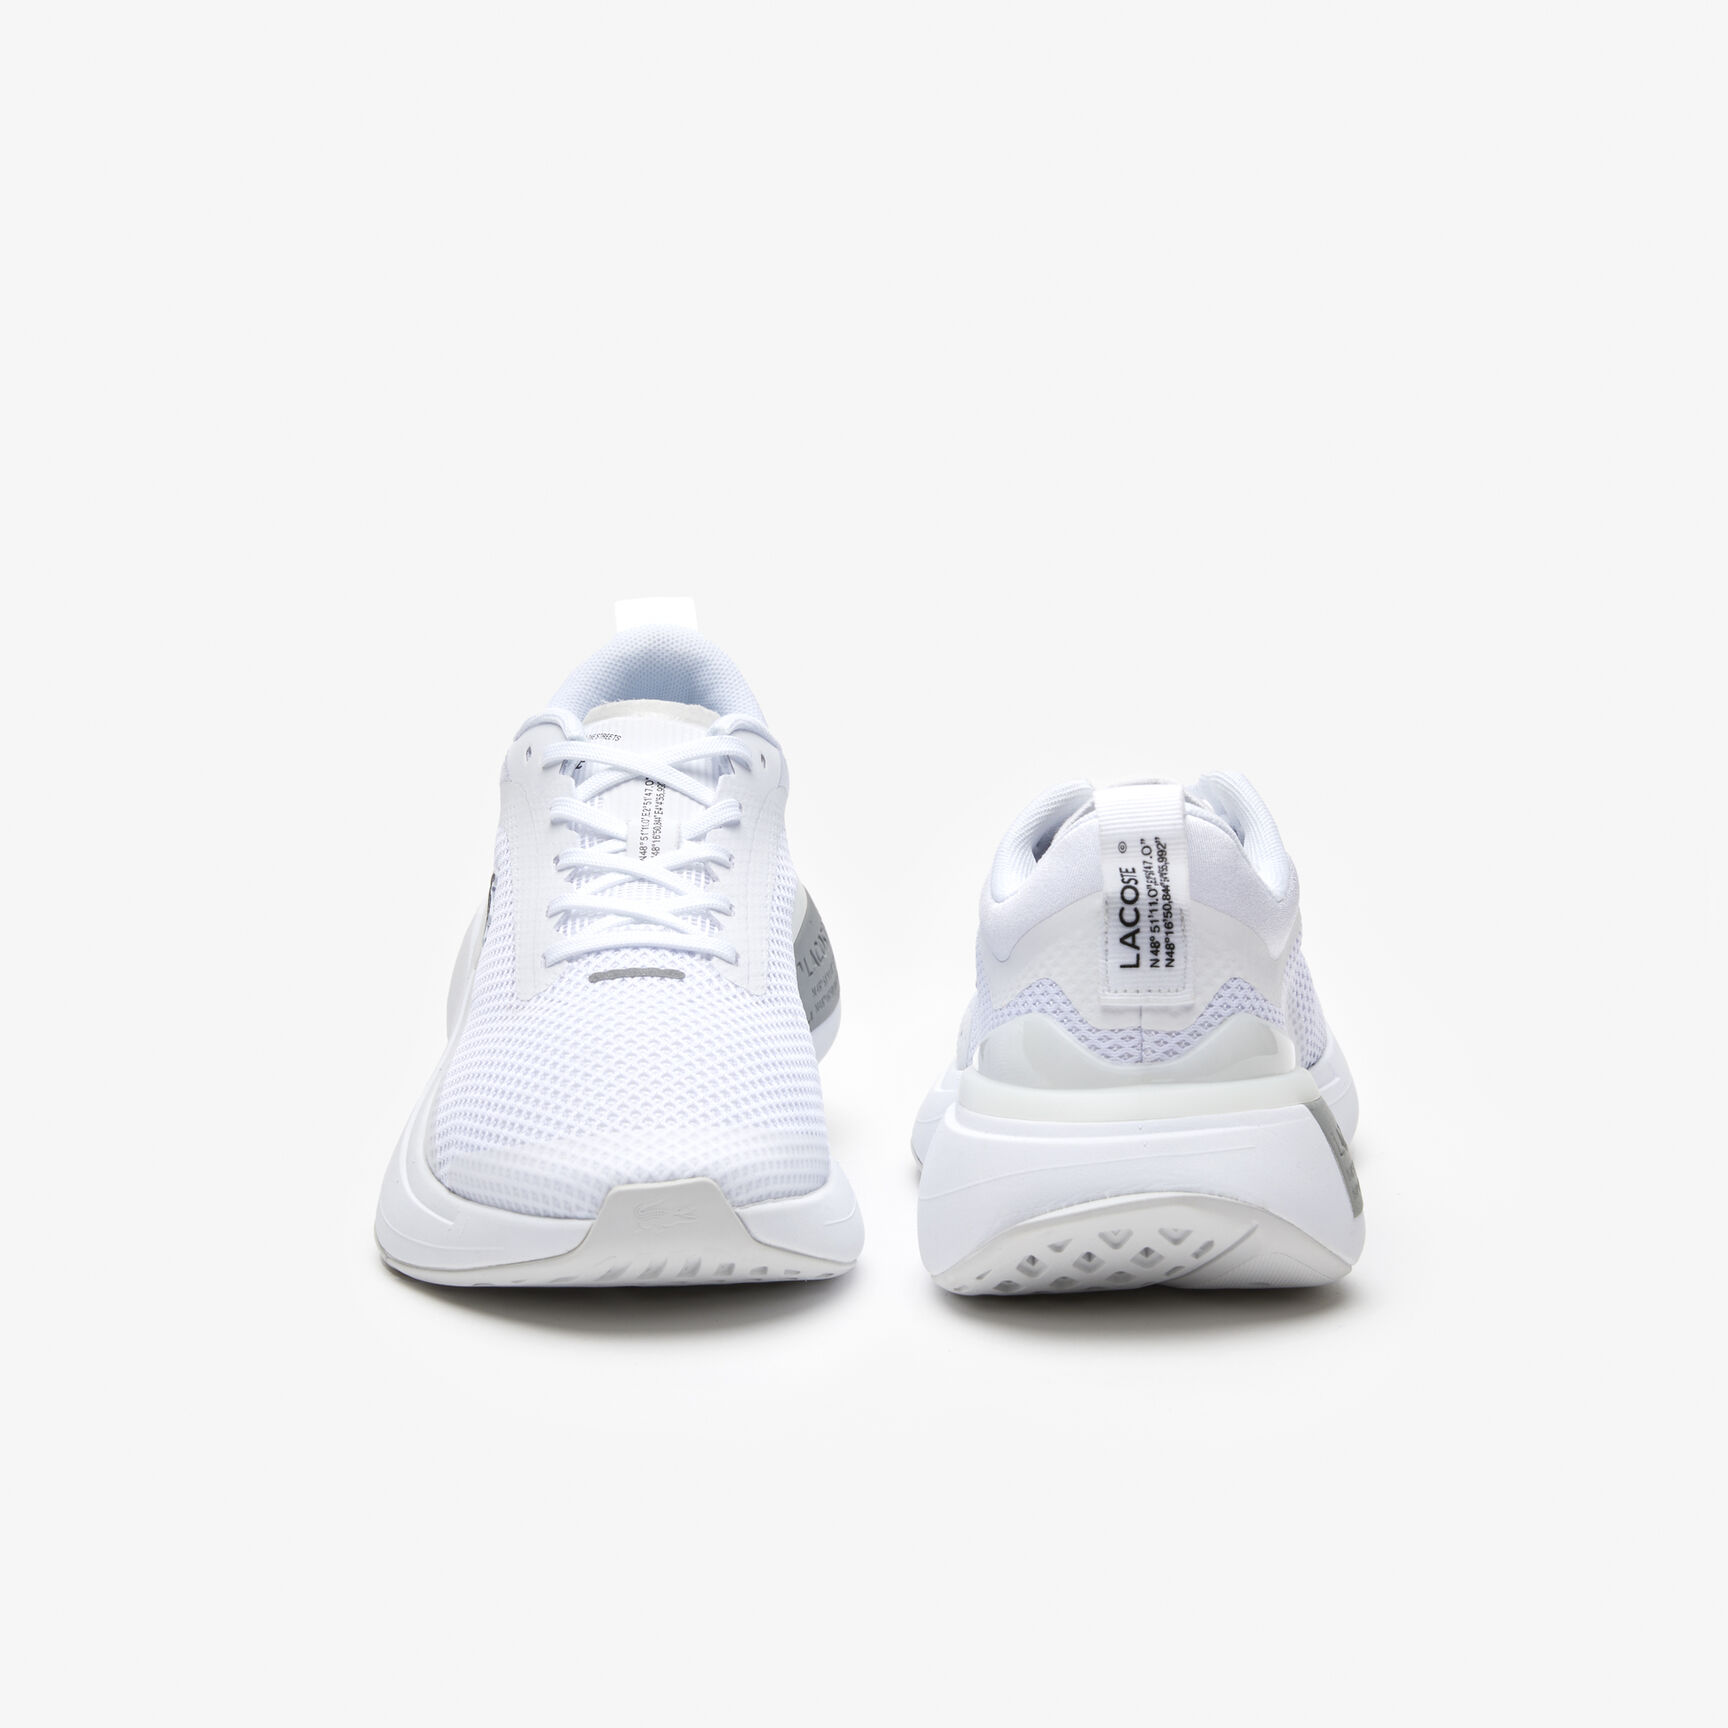 Buy Women's Lacoste Run Spin Evolution Textile Trainers | Lacoste UAE